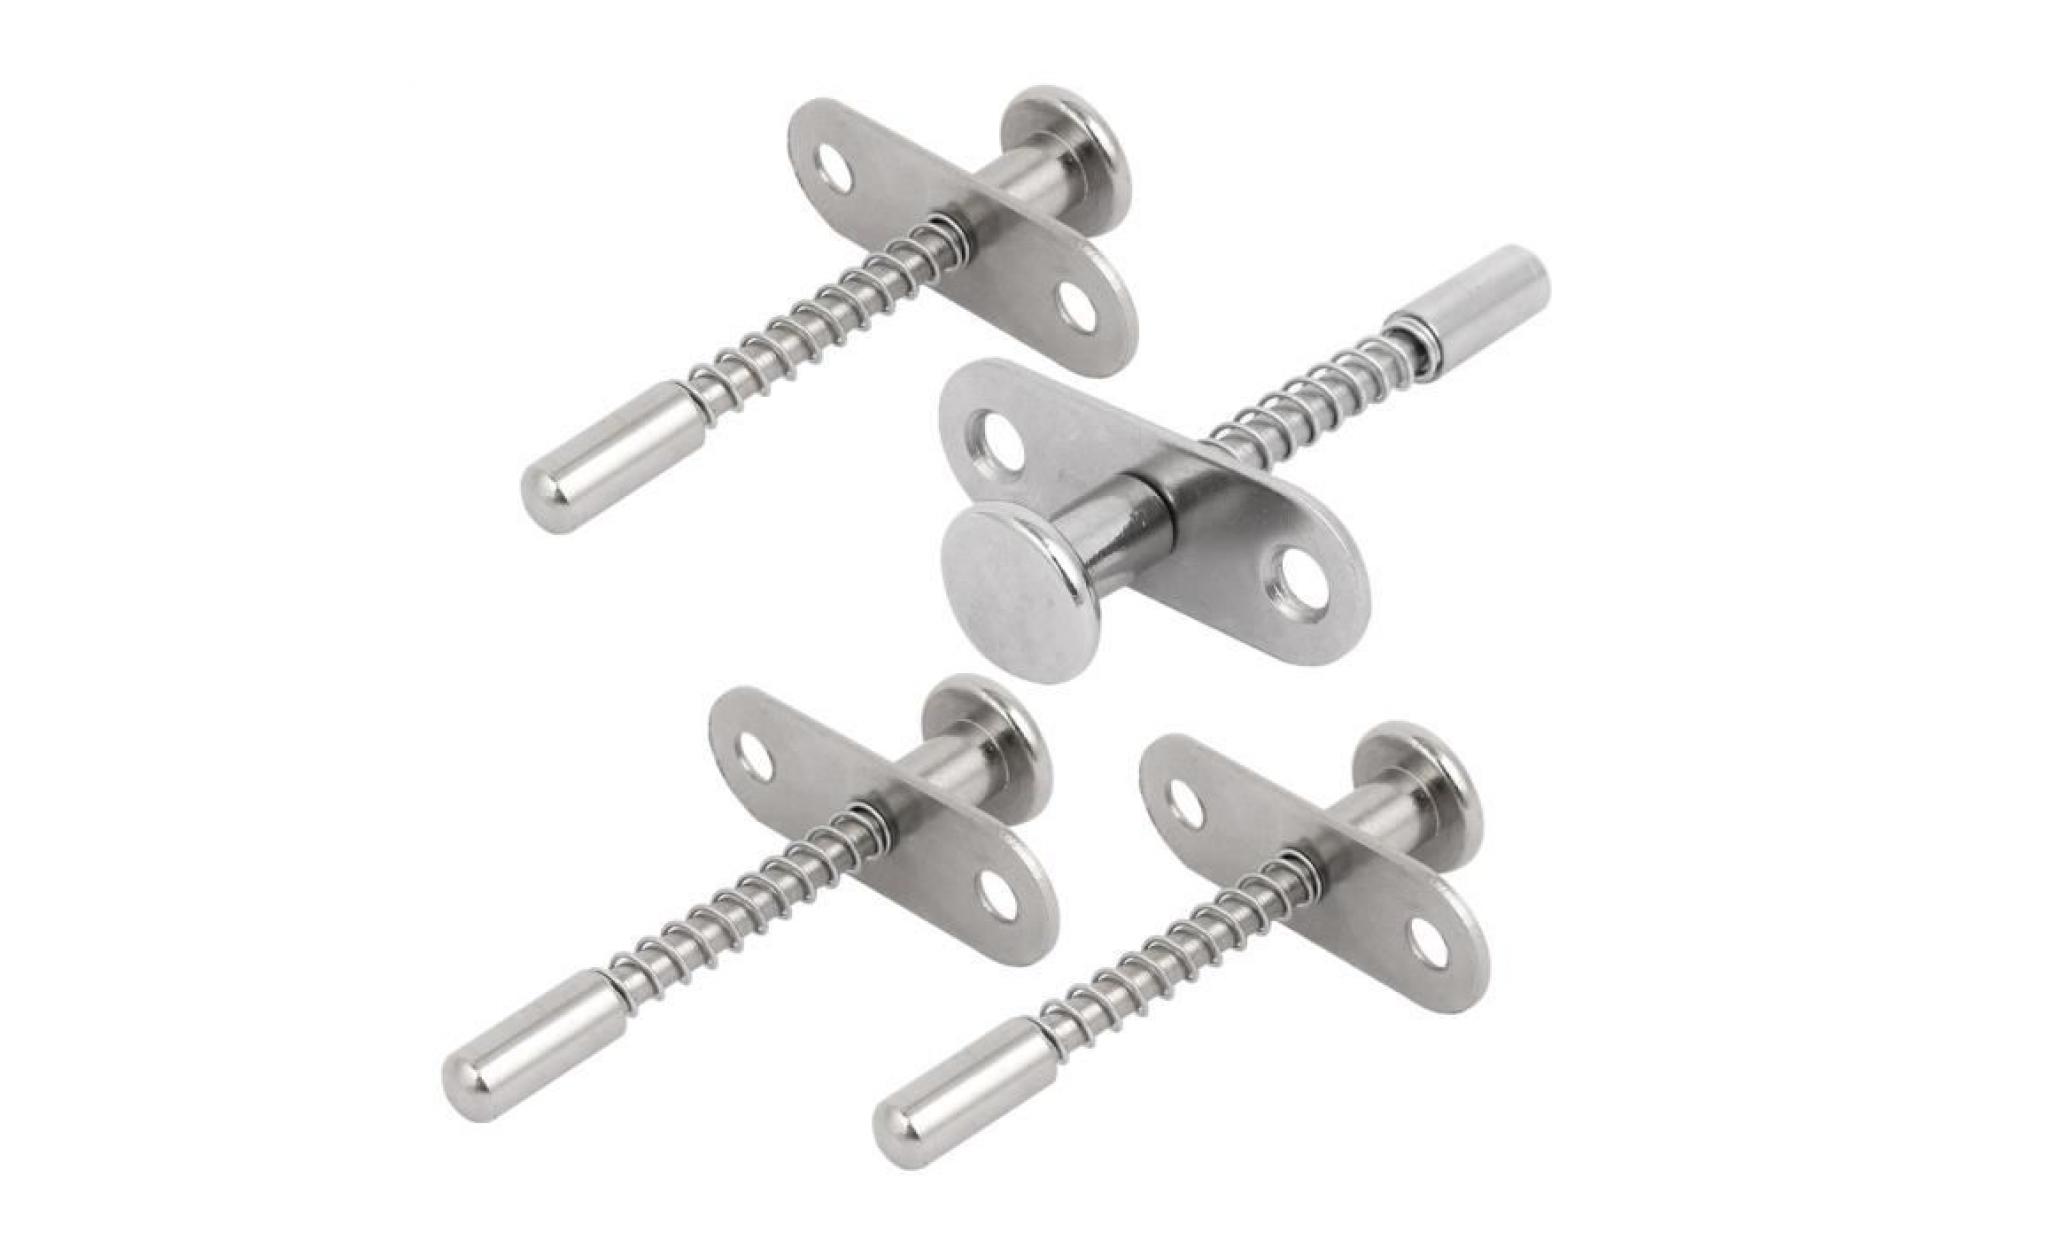 4pcs crib stainless steel spring quick release lock pin w plate 7mm dia